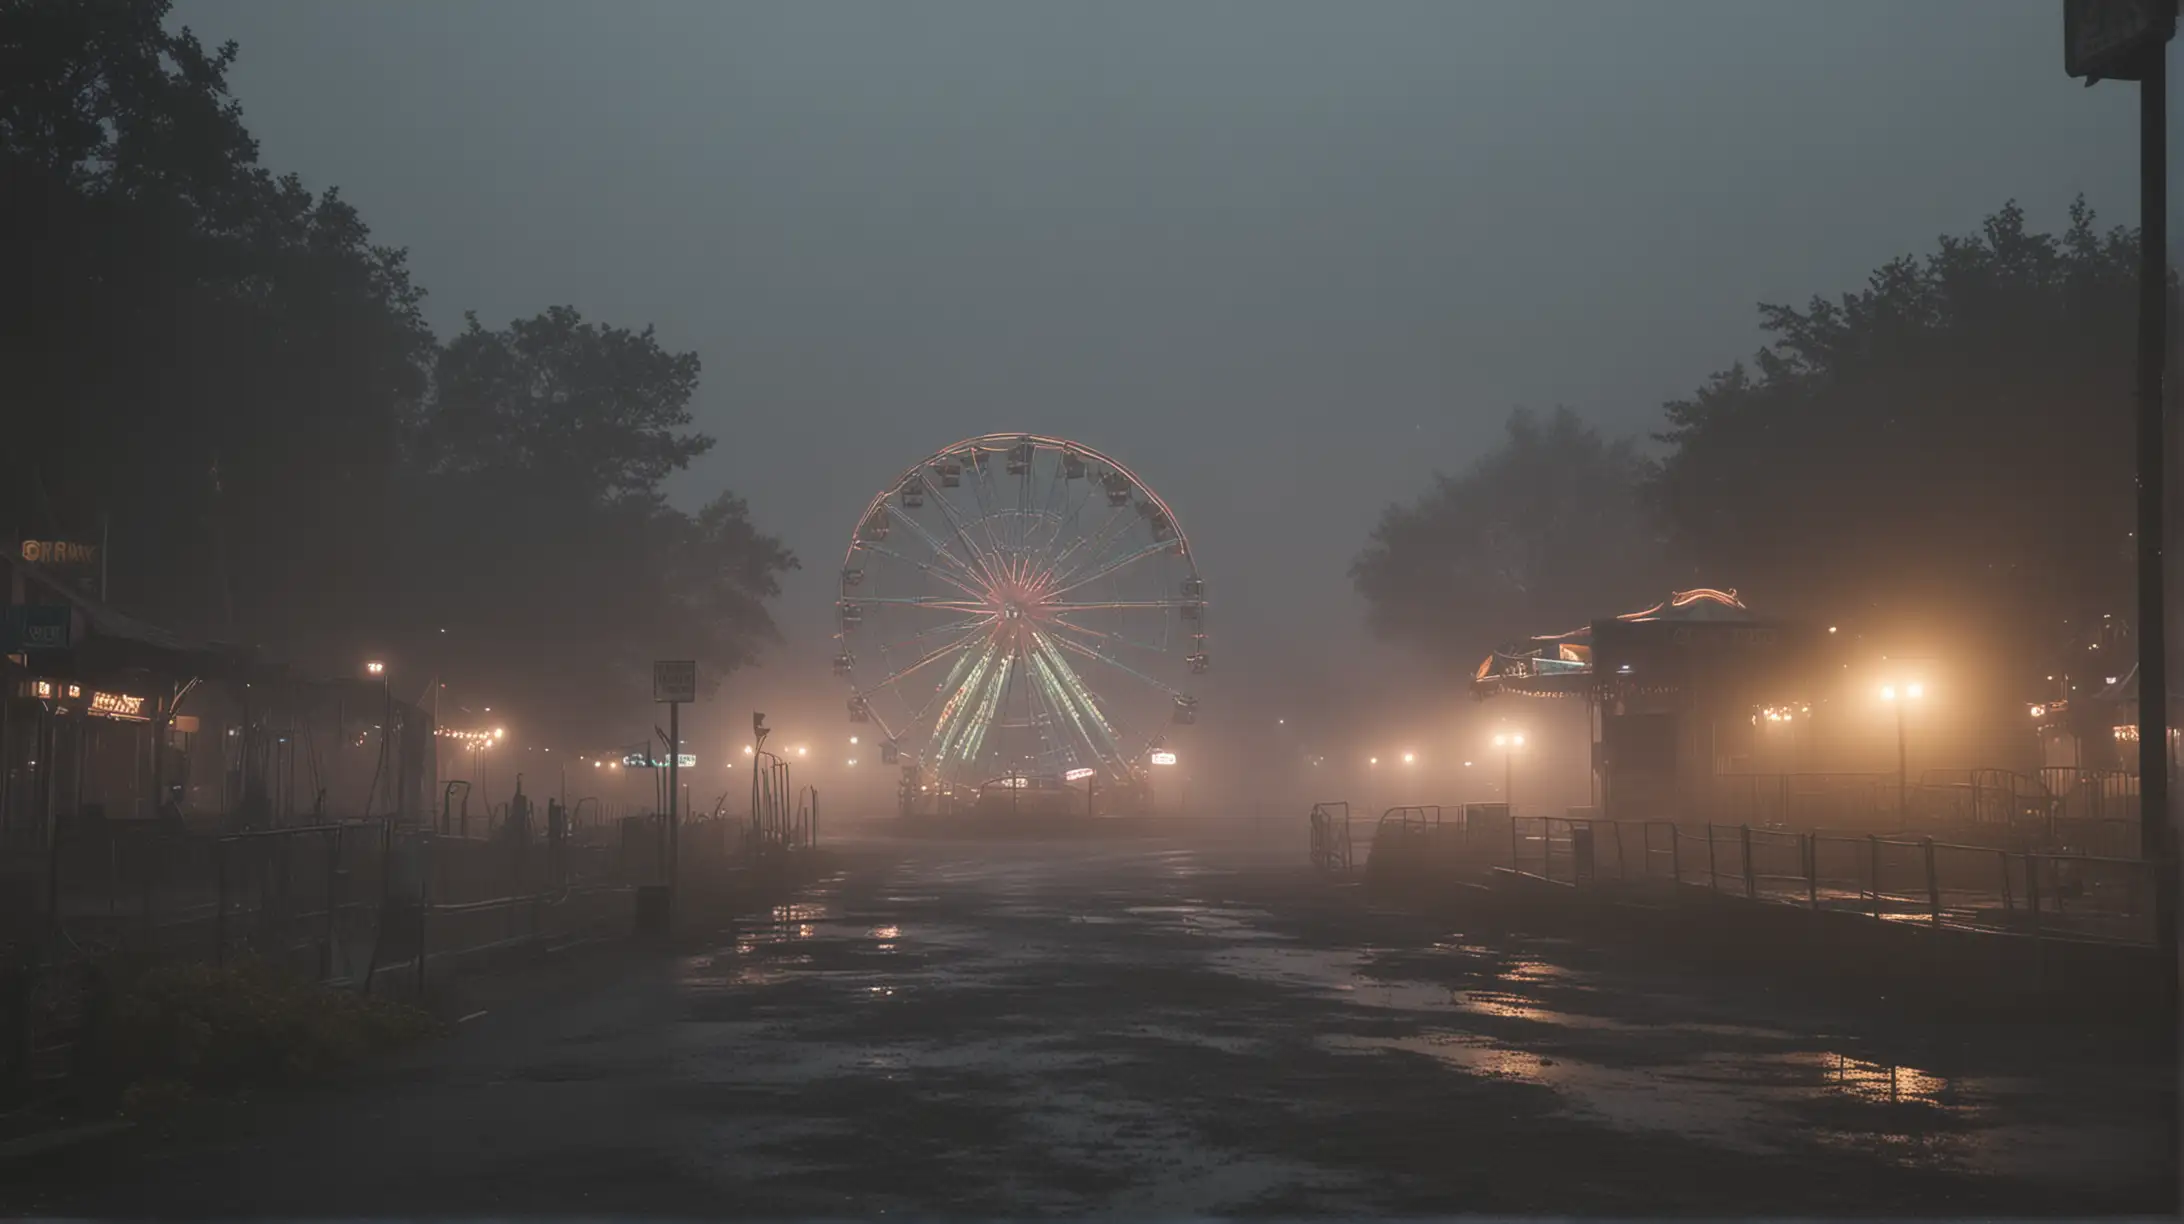 Abandoned theme park, dark moody appearance, mist and fog, light source coming in from a car, u see a run down fair ride aswell